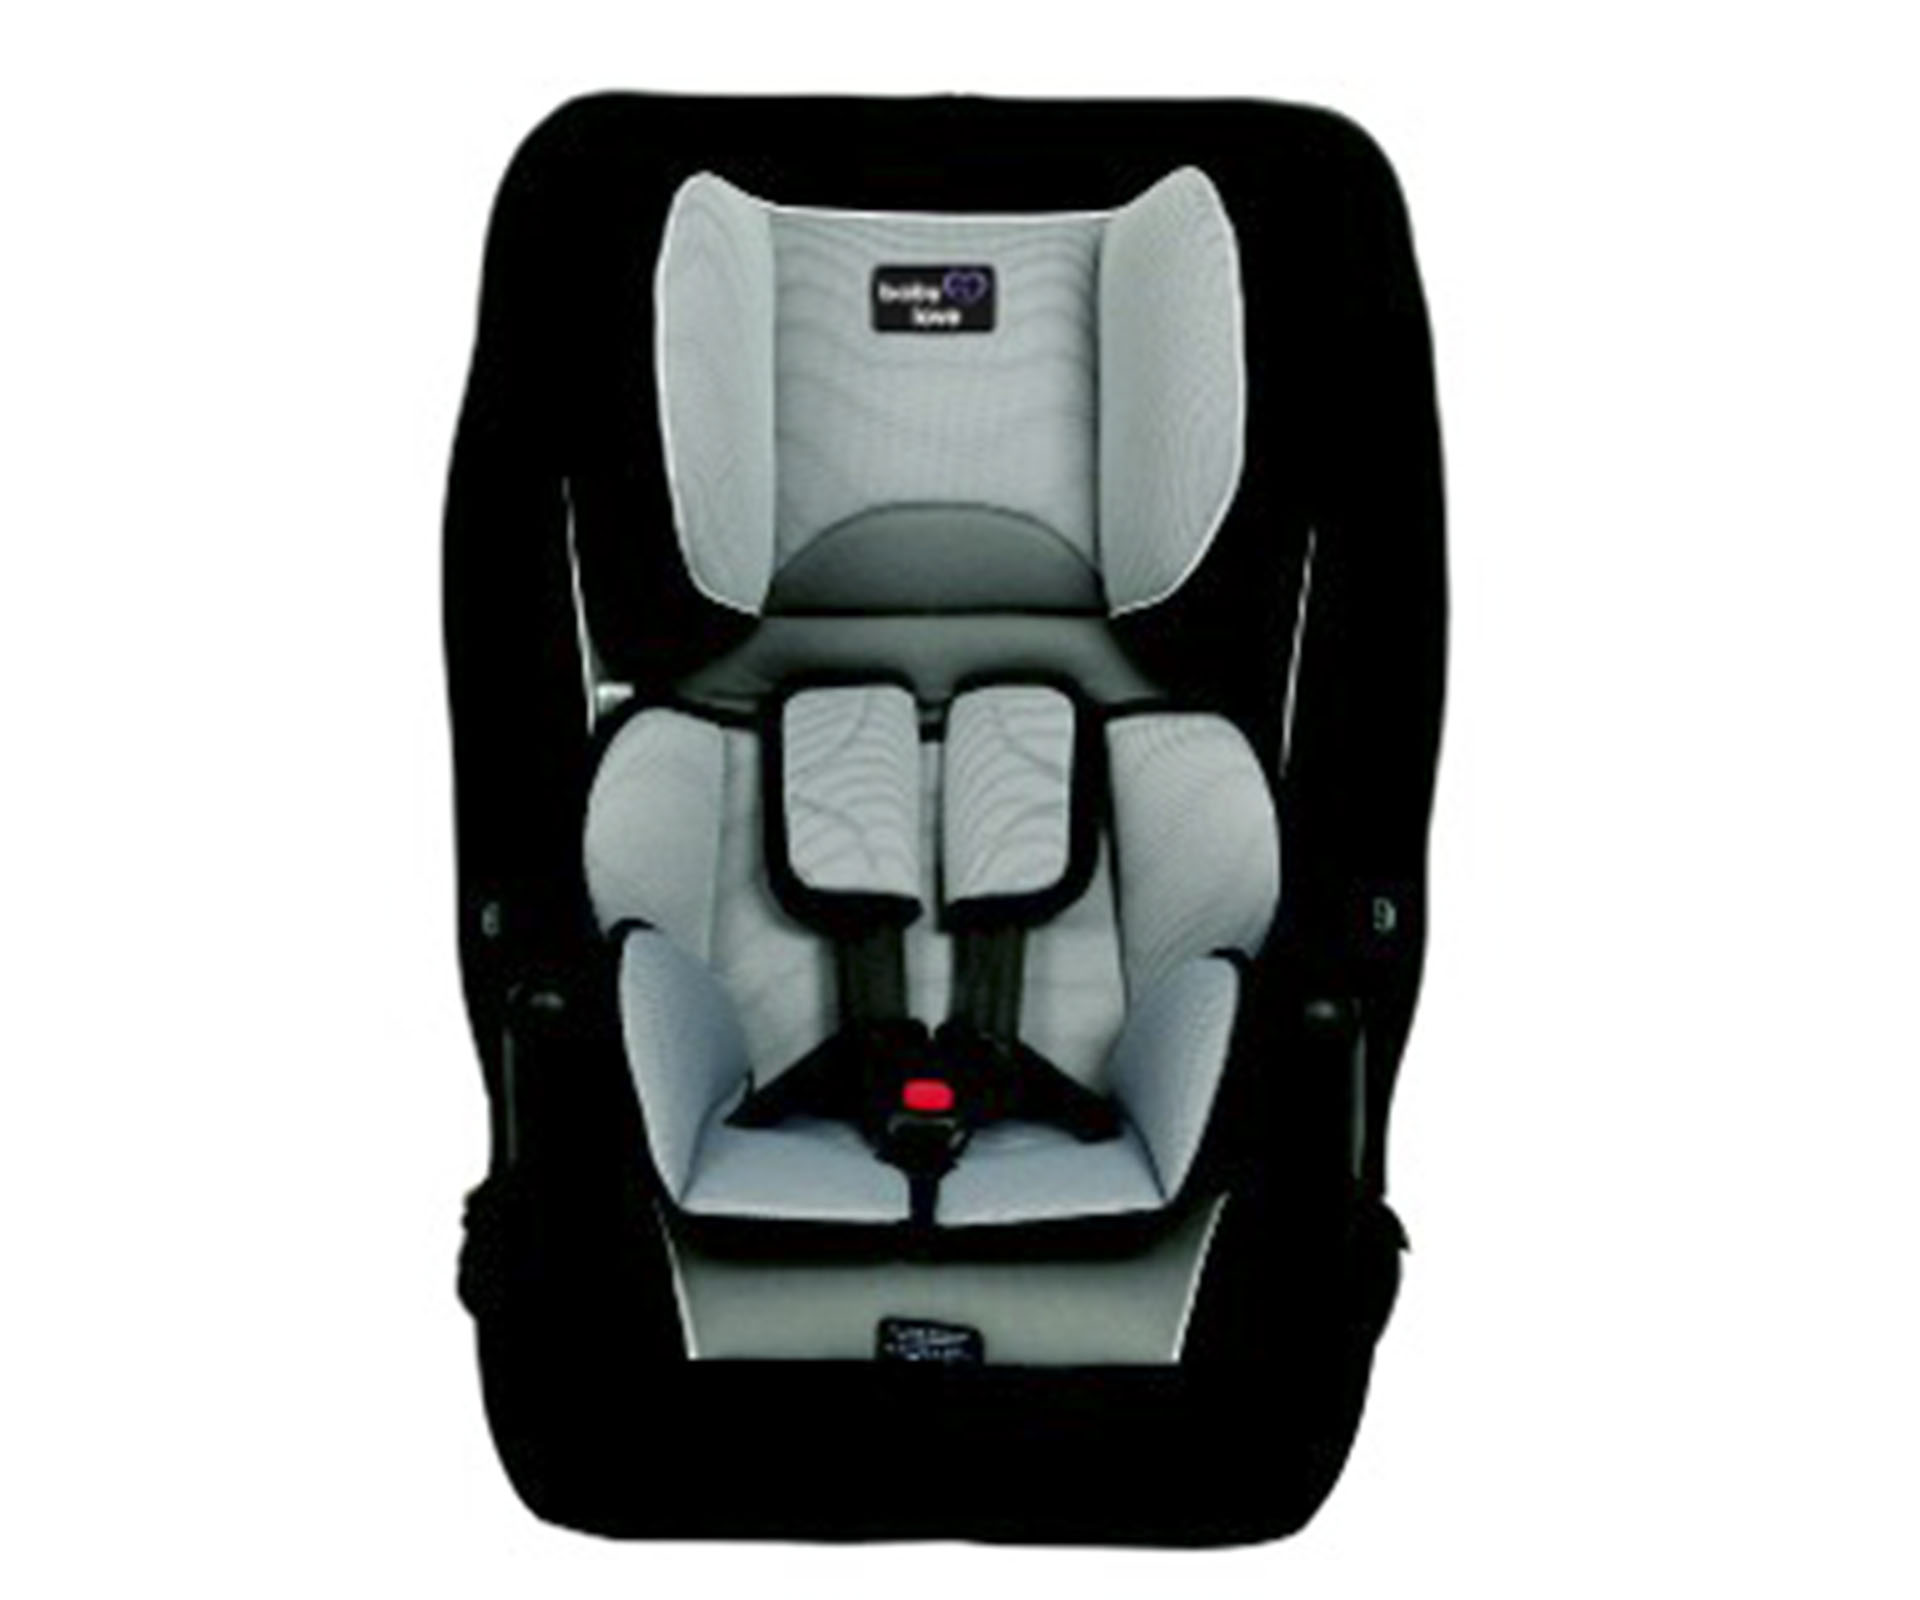 Most popular car seat & travel systems | Top Pick 2016